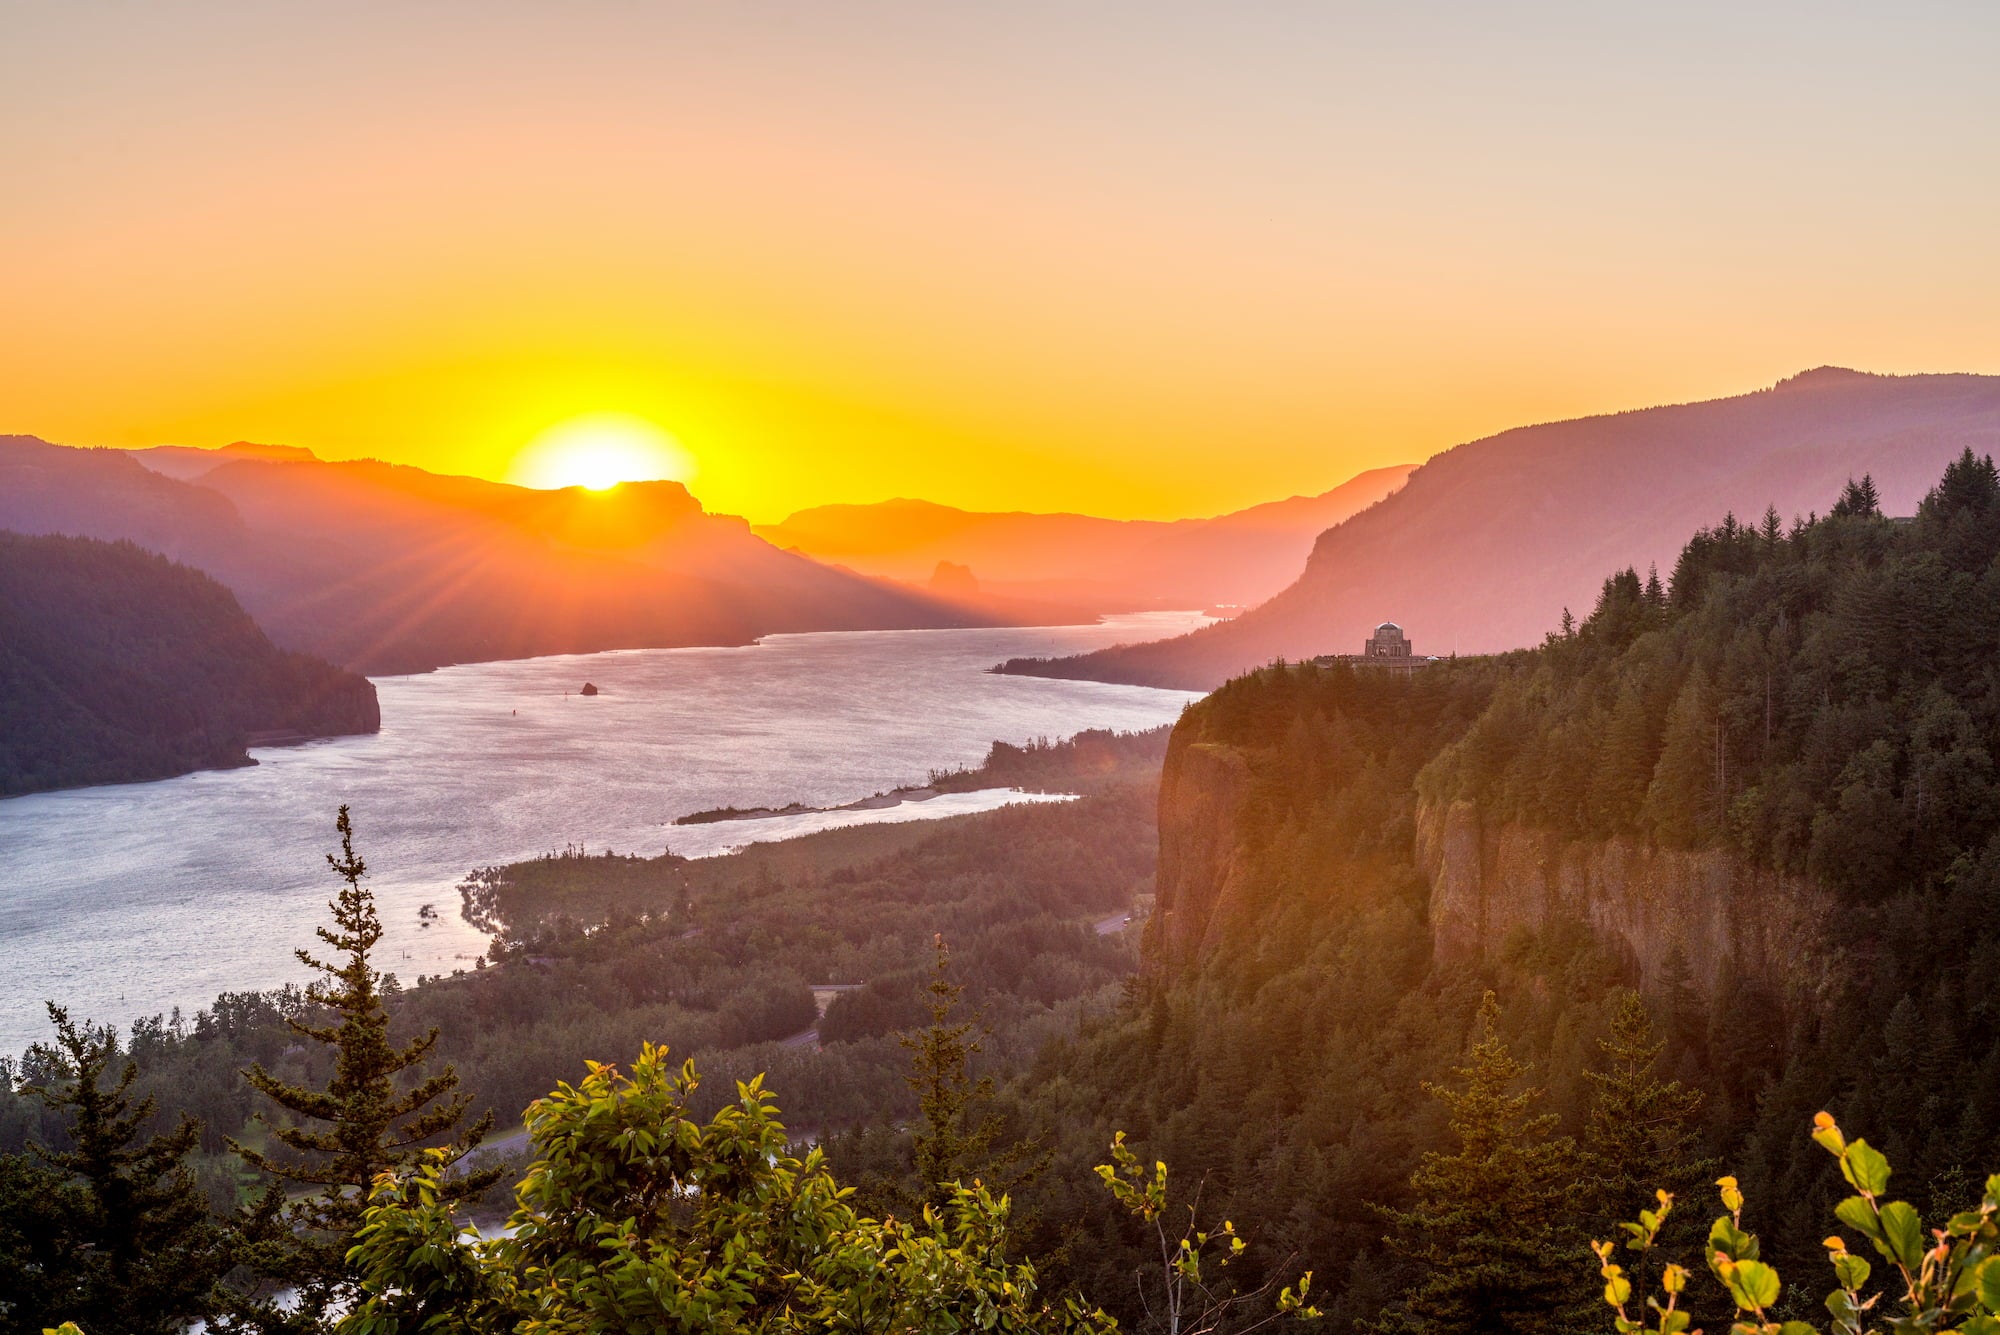 sunset at the columbia river gorge